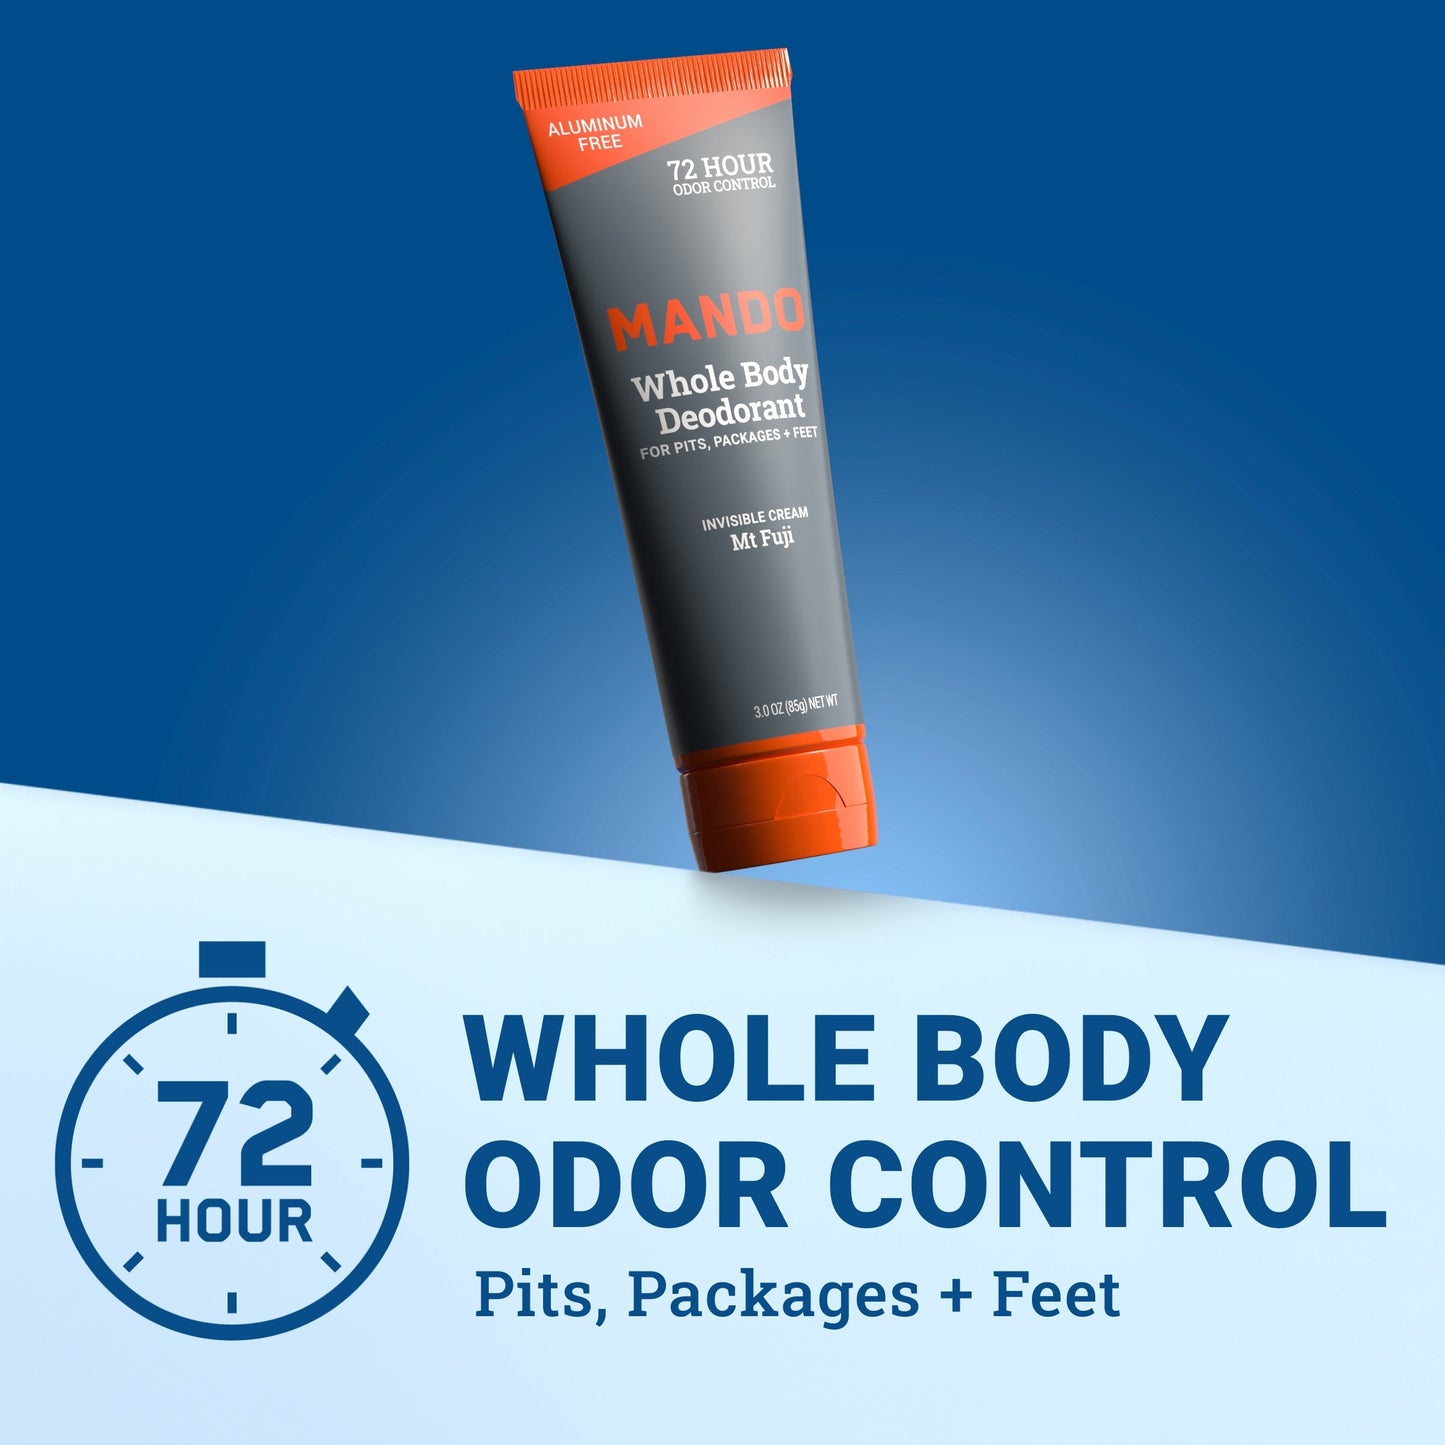 Mando Invisible cream deodorant in mt fuji scent with text: 72 hour whole body odor control, pits, packages + feet 